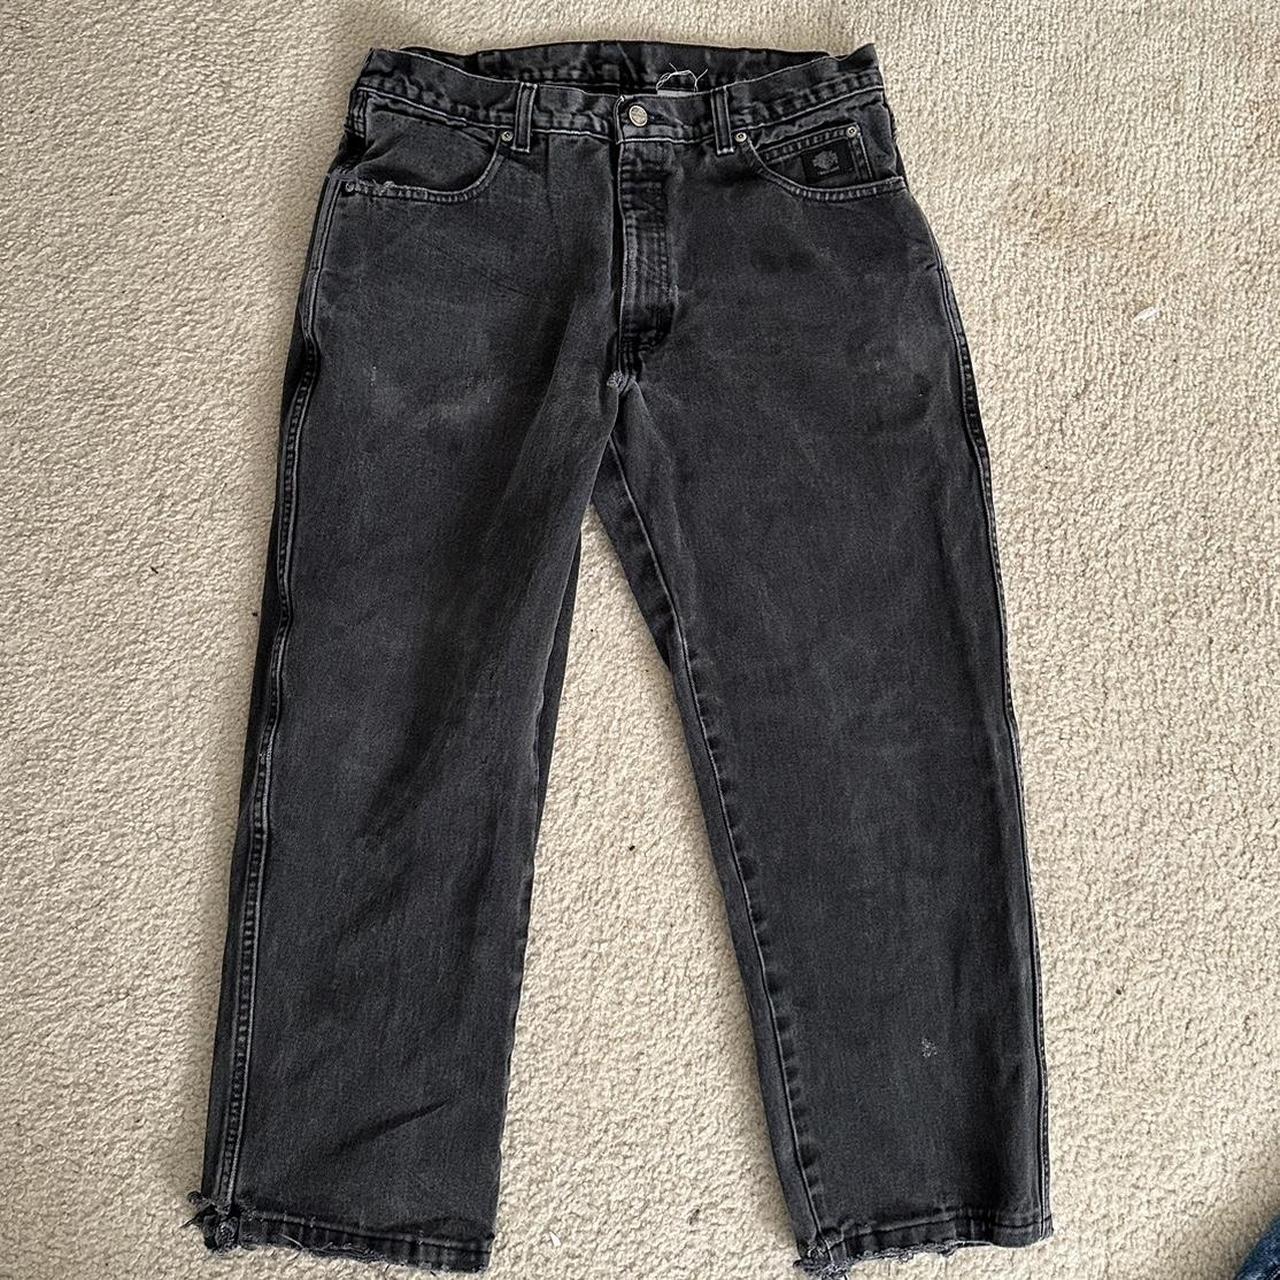 Black Harley Davidson jeans with some wear from... - Depop